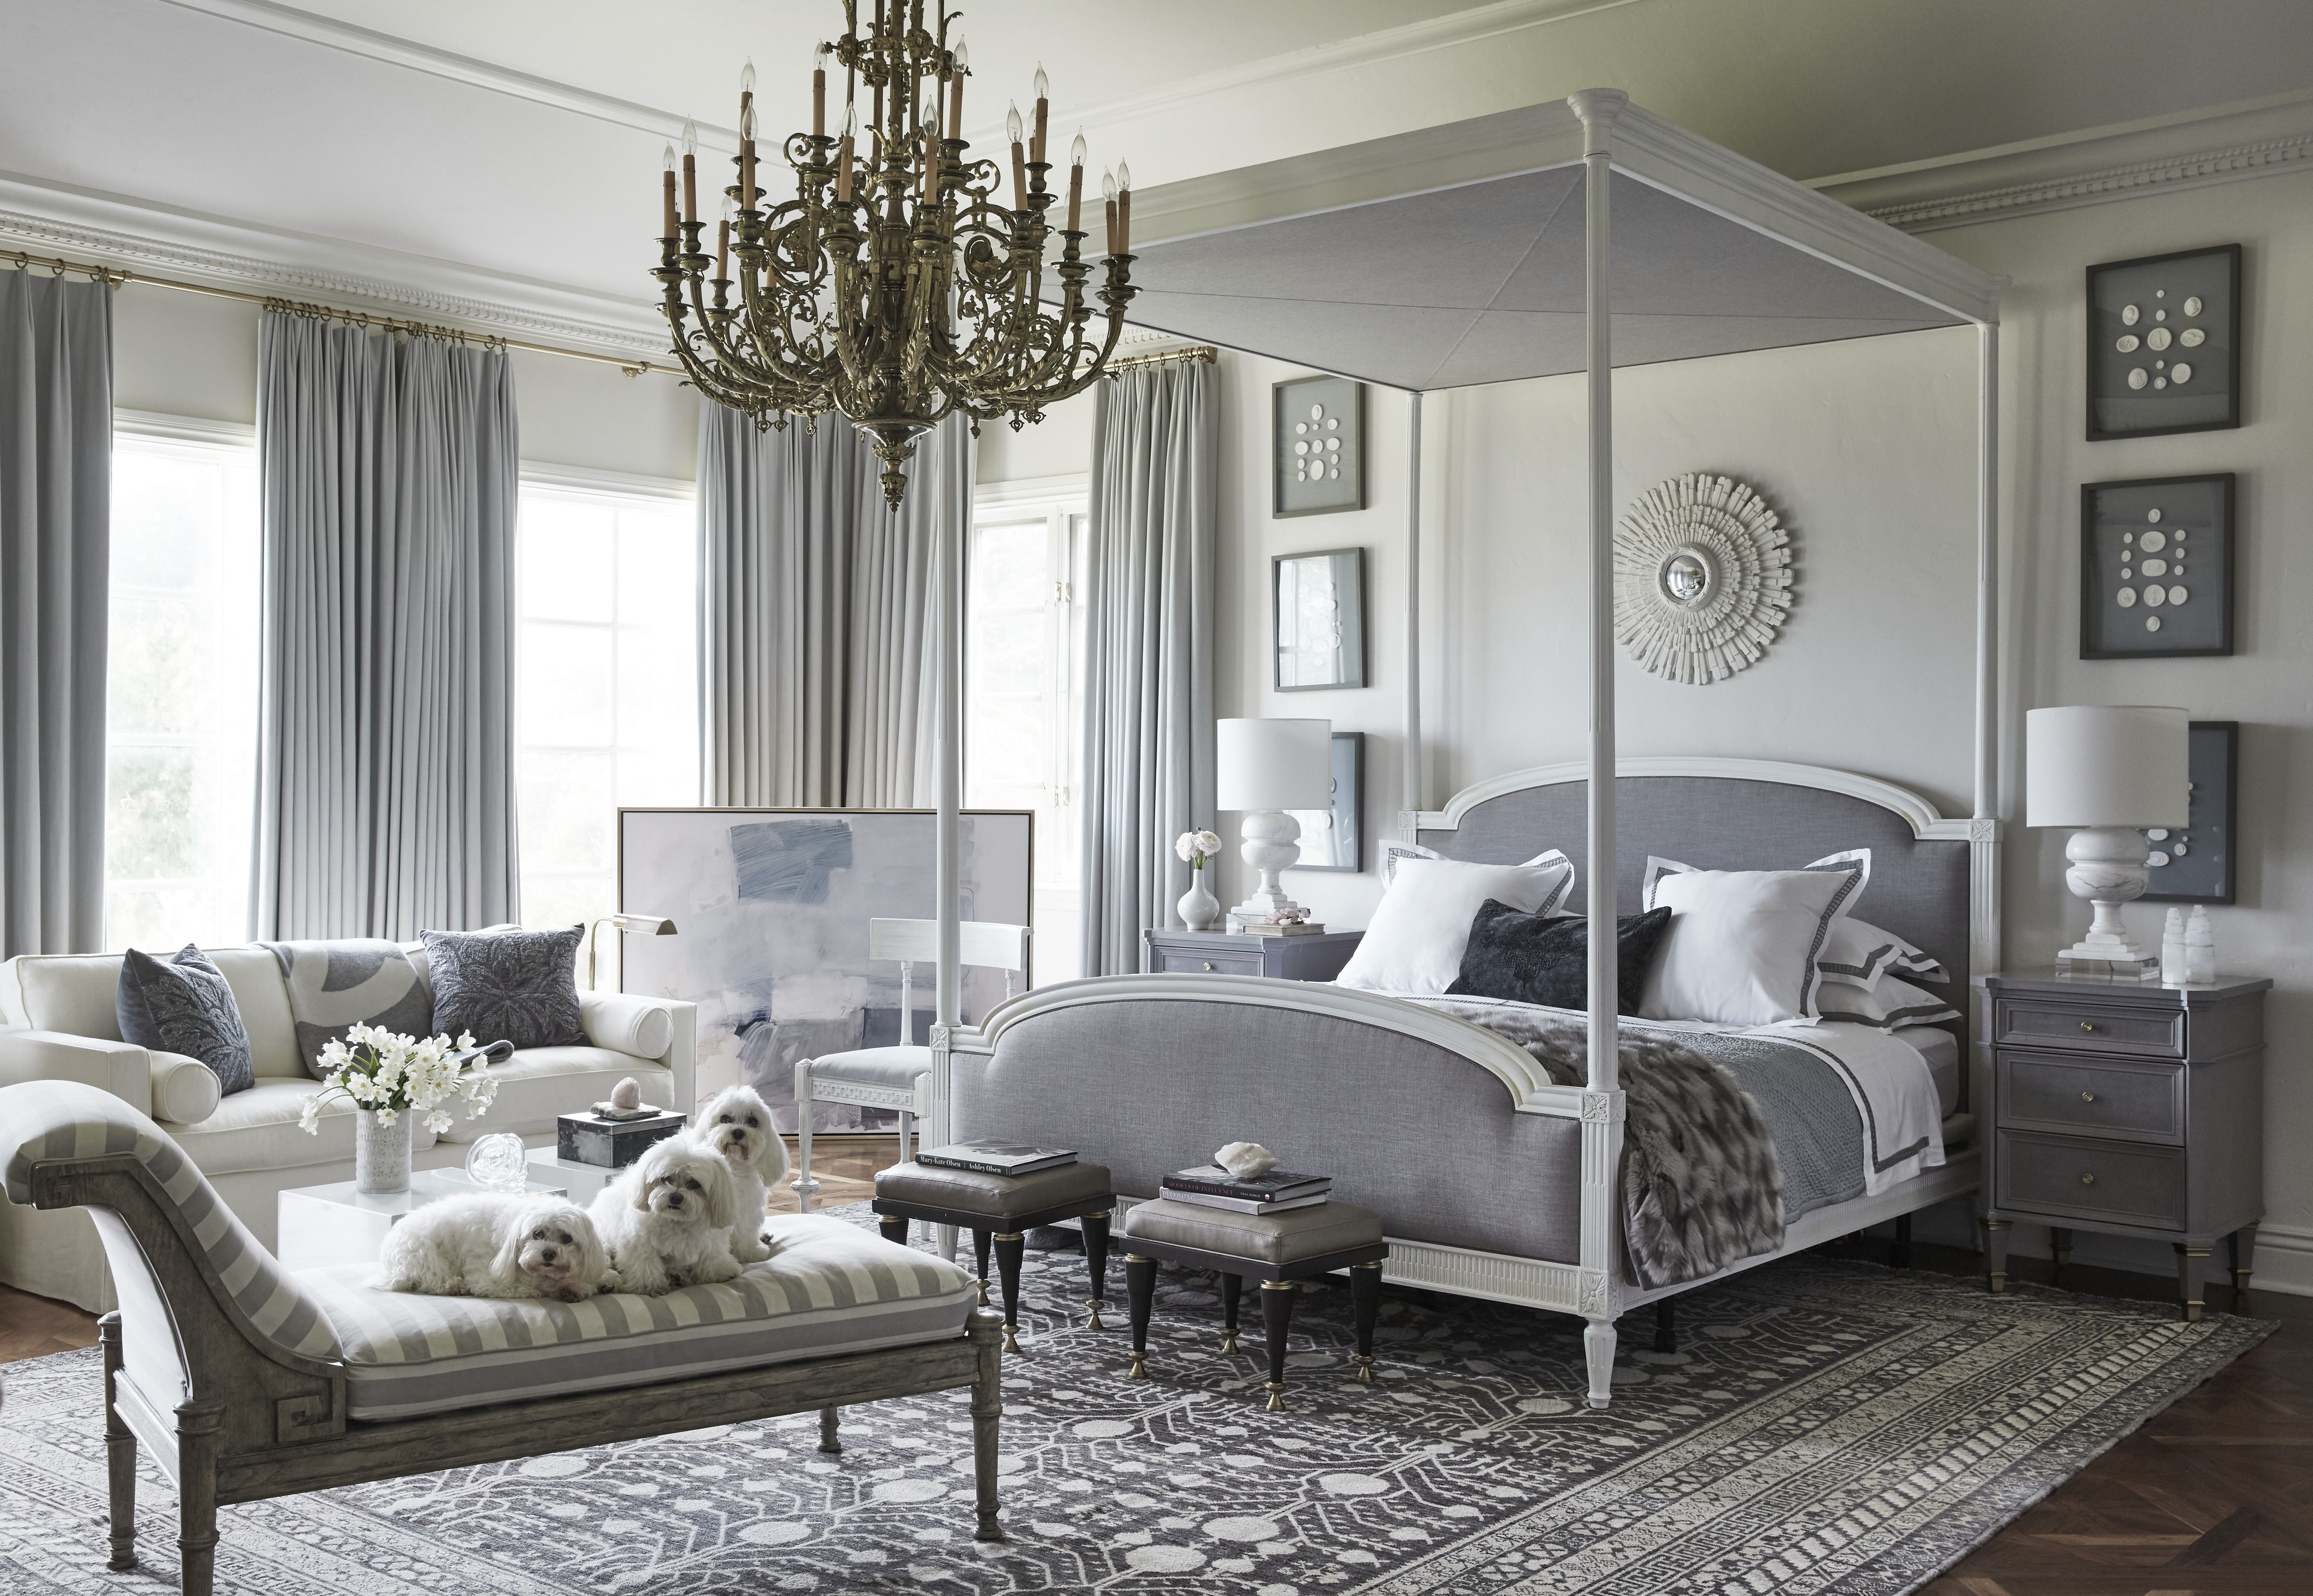 Update more than 130 white bedroom furniture decorating ideas super hot ...